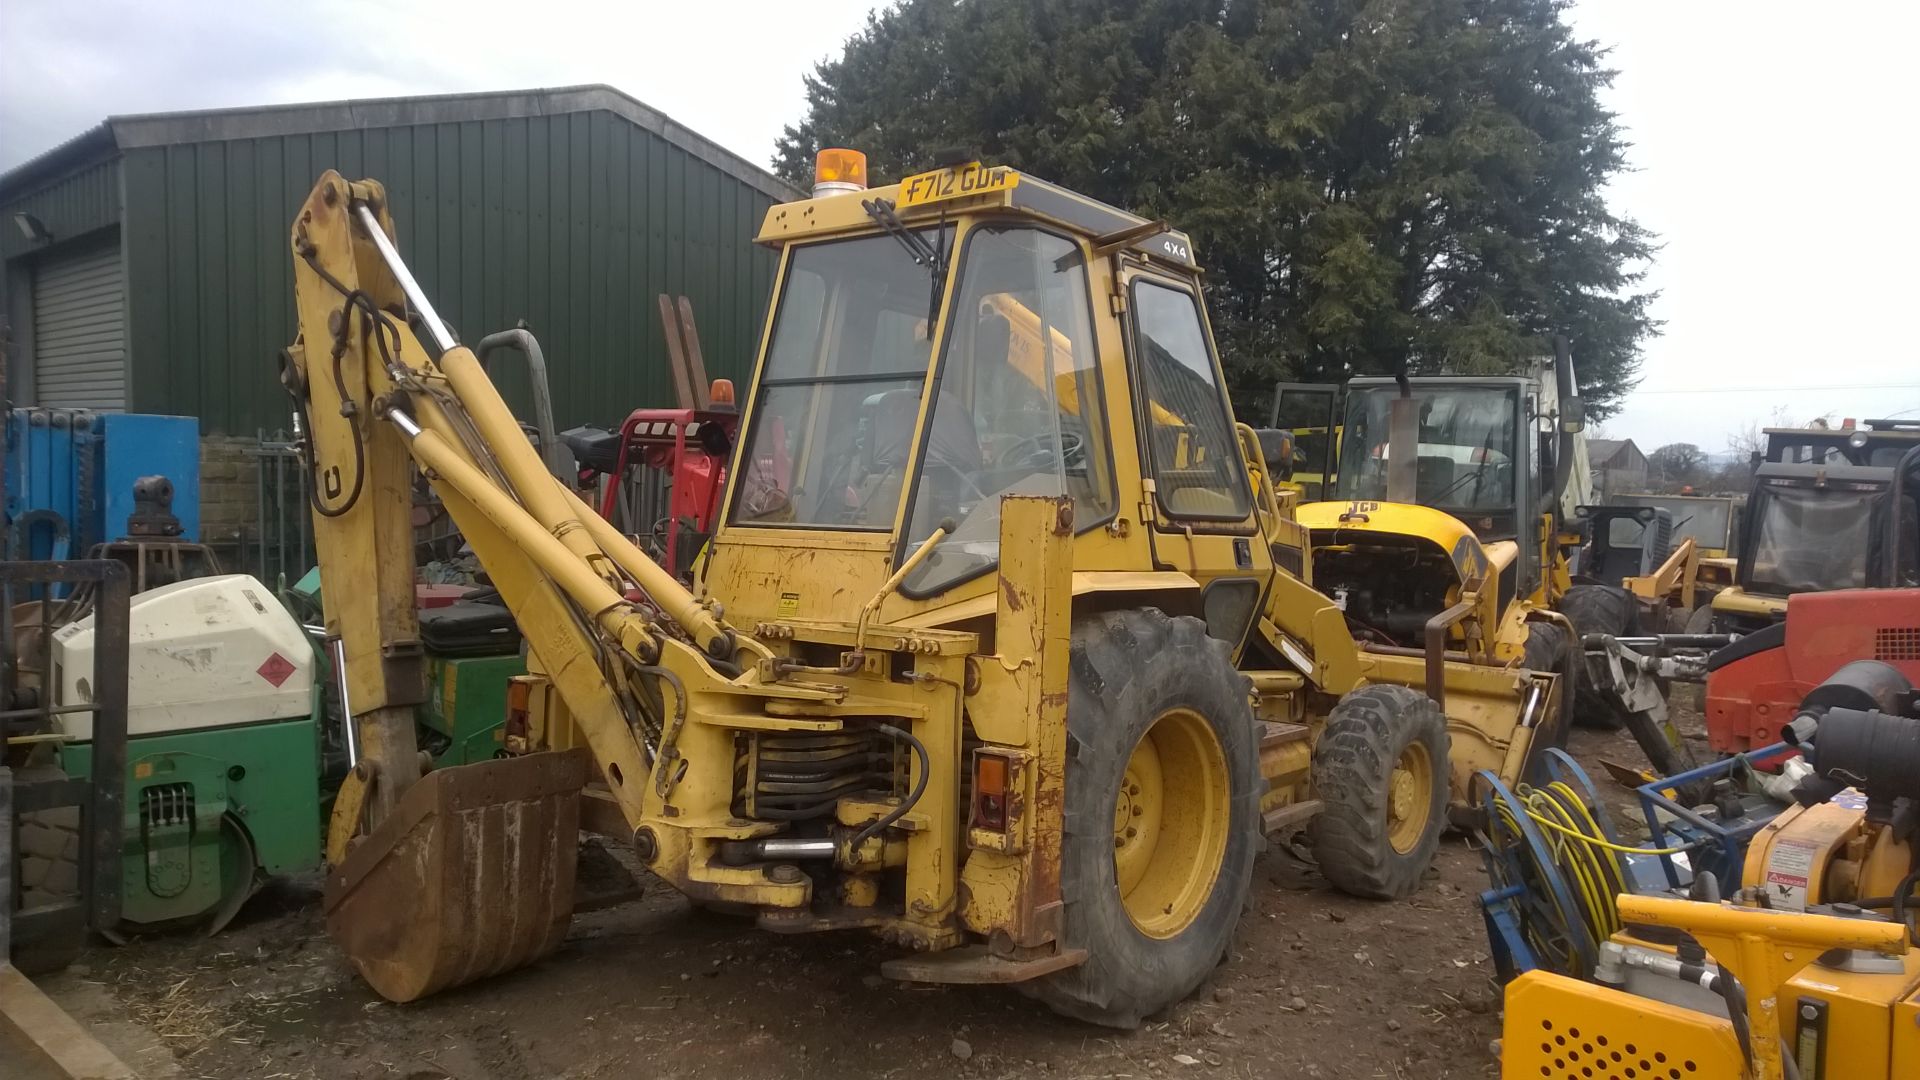 DS - 1988/F REG CATERPILLAR 428 4X4 EXCAVATOR/DIGGER - WITH A 4 IN 1 BUCKET *PLUS VAT*   SHOWING 1